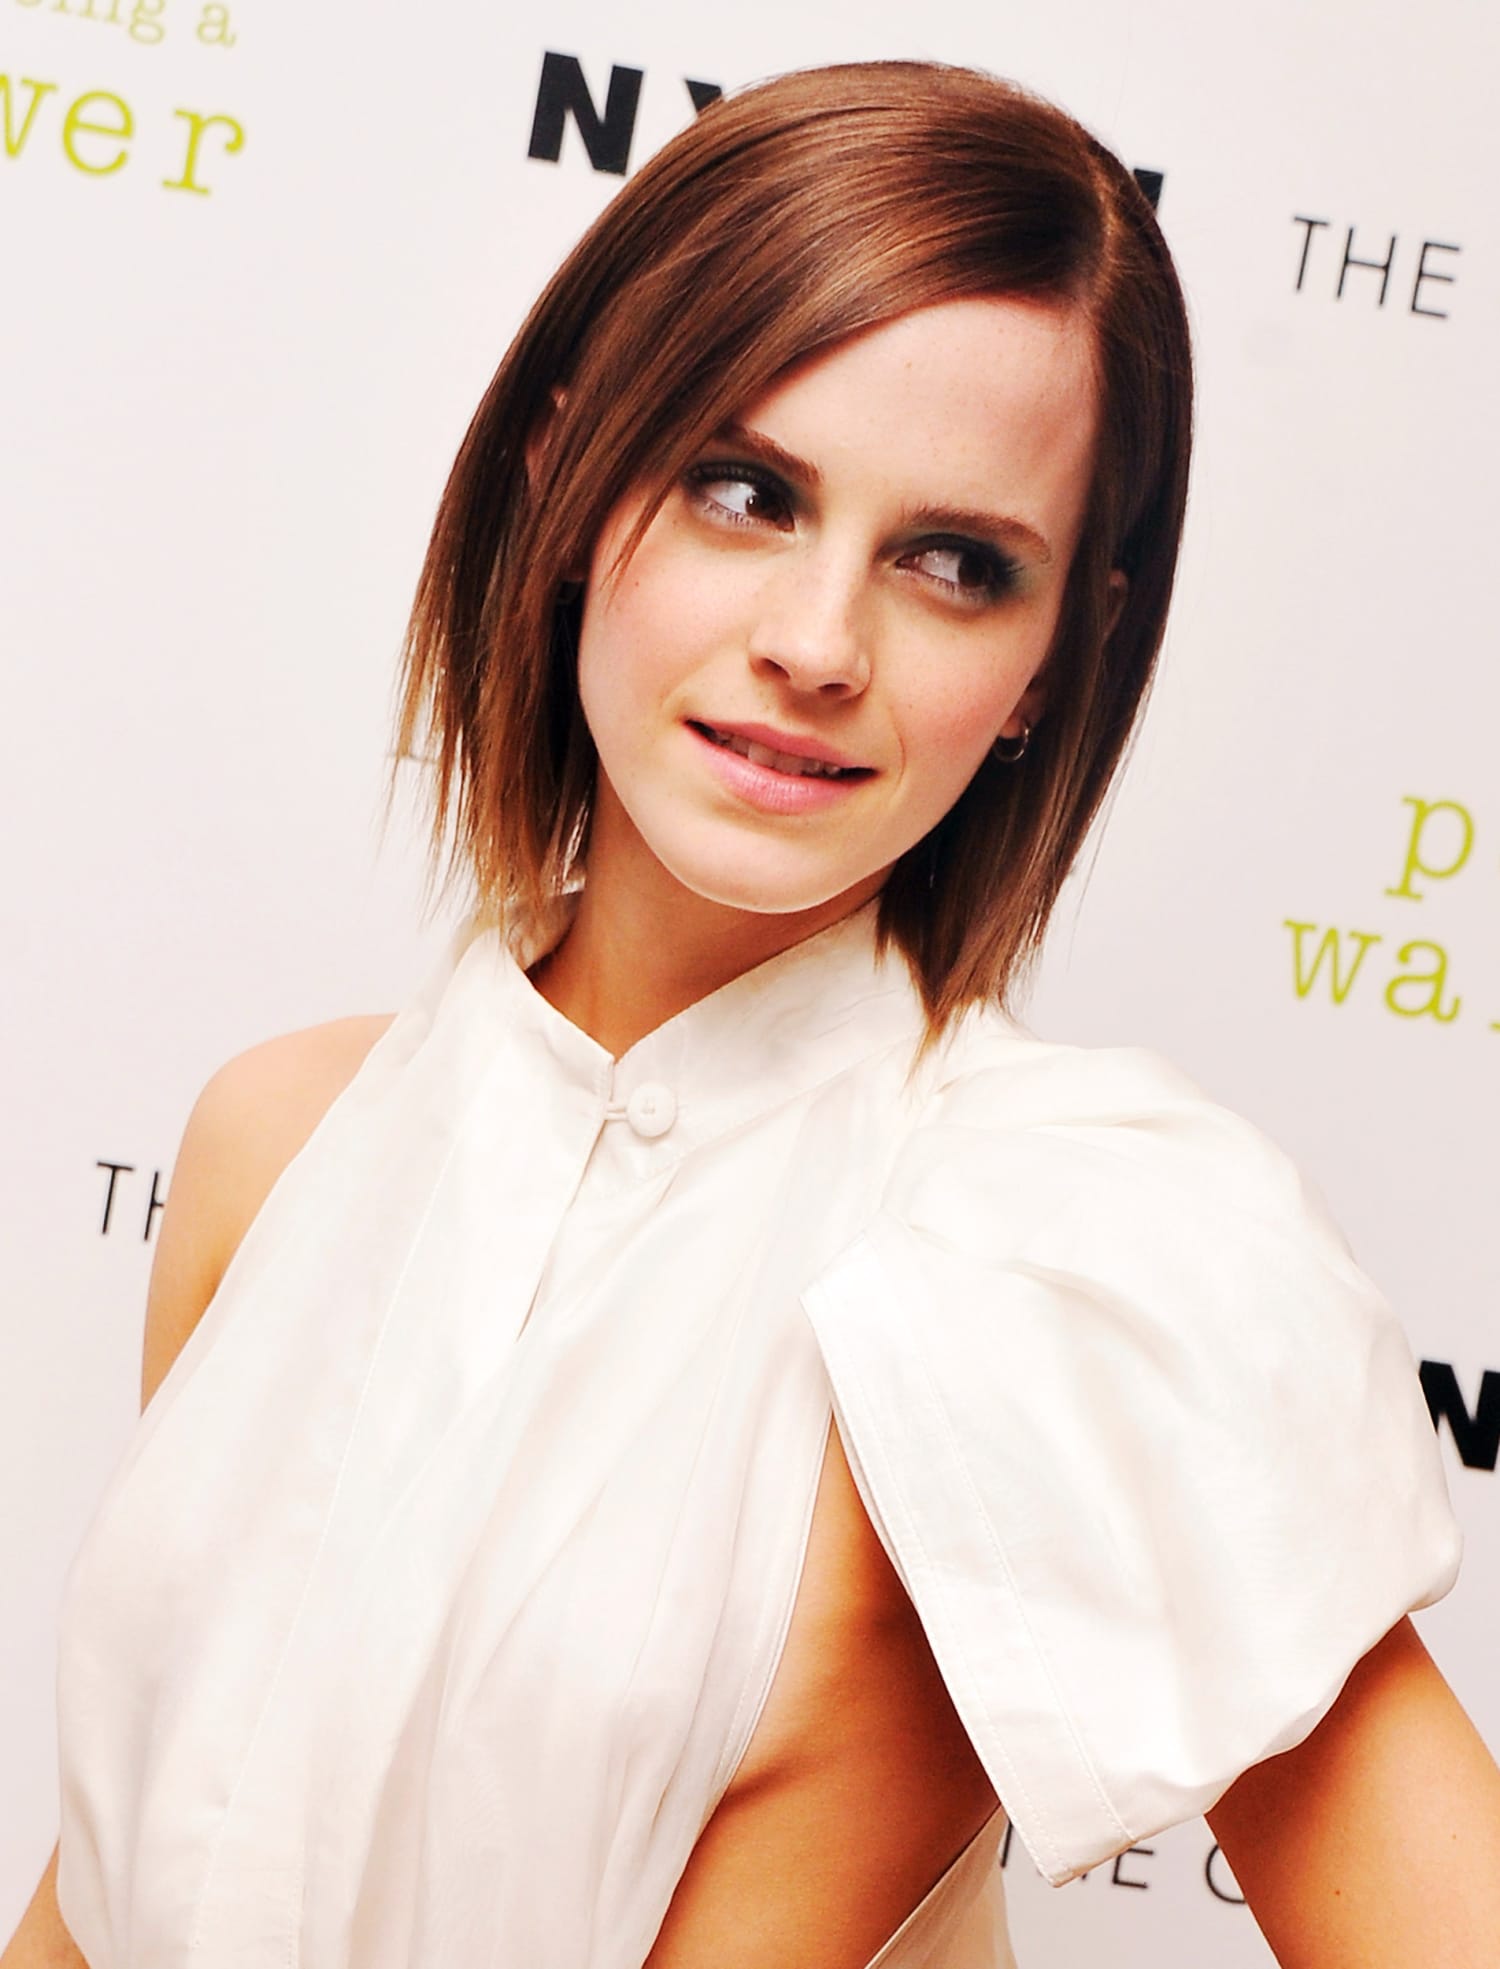 Emma Watson Brought Back Her Iconic Pixie Cut